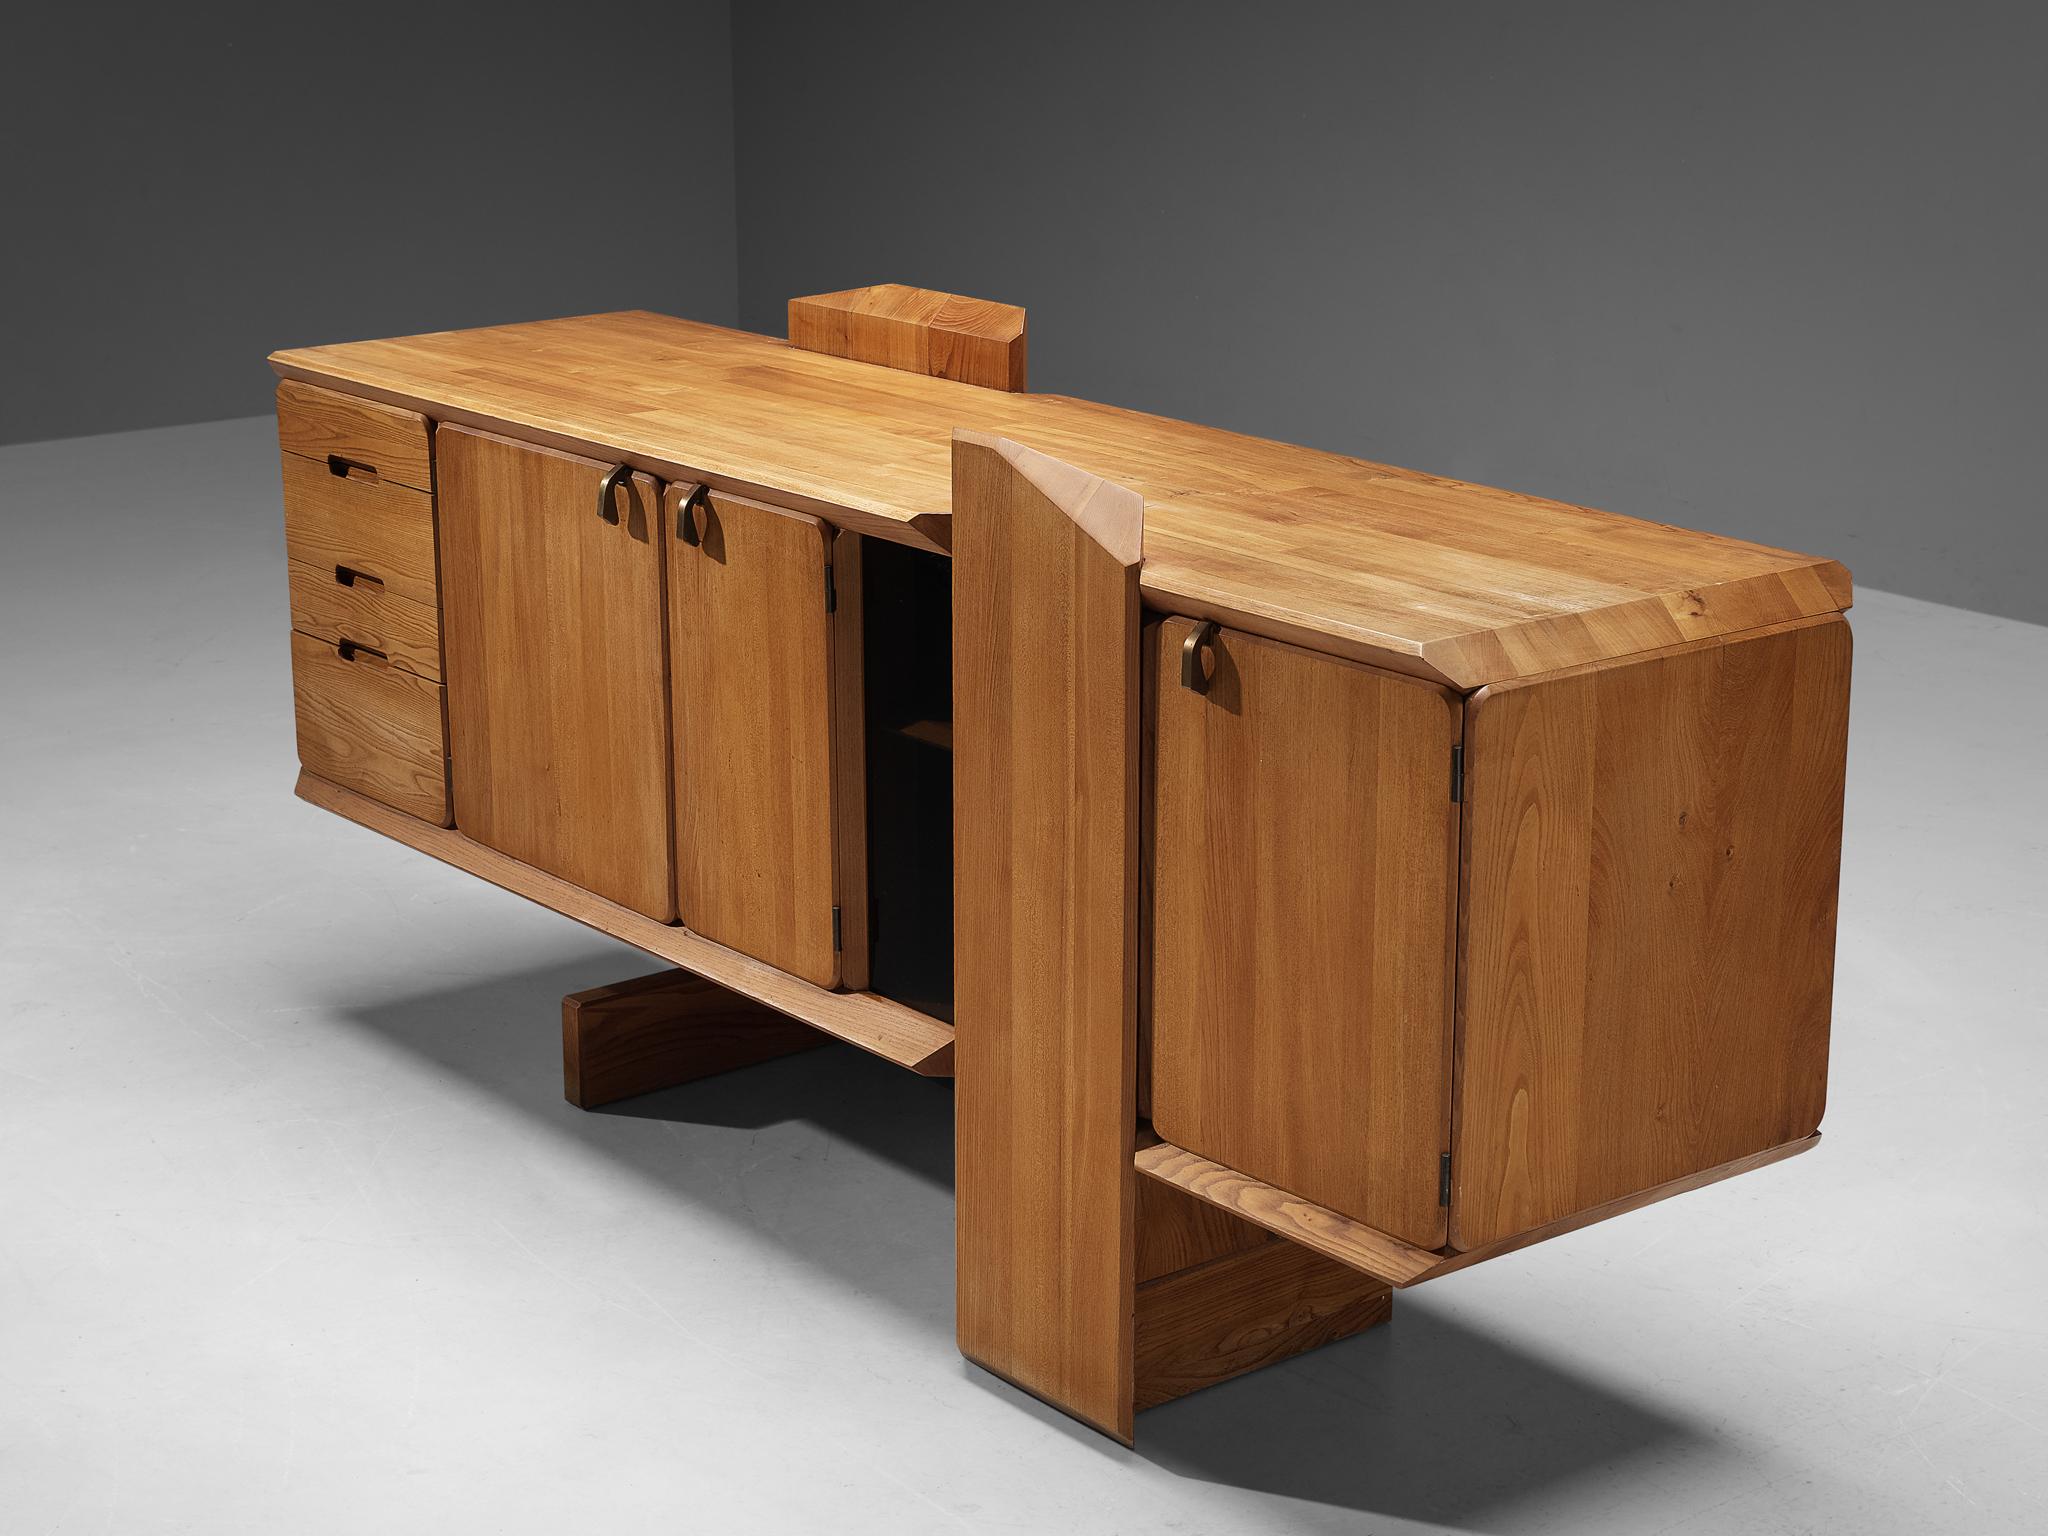 Pierre Chapo, sideboard, model 'R28', elm, France, 1985.

This table is one of the early editions designed by Pierre Chapo, known for his hallmark use of solid elmwood and a commitment to pure and clean design and construction principles. The R28